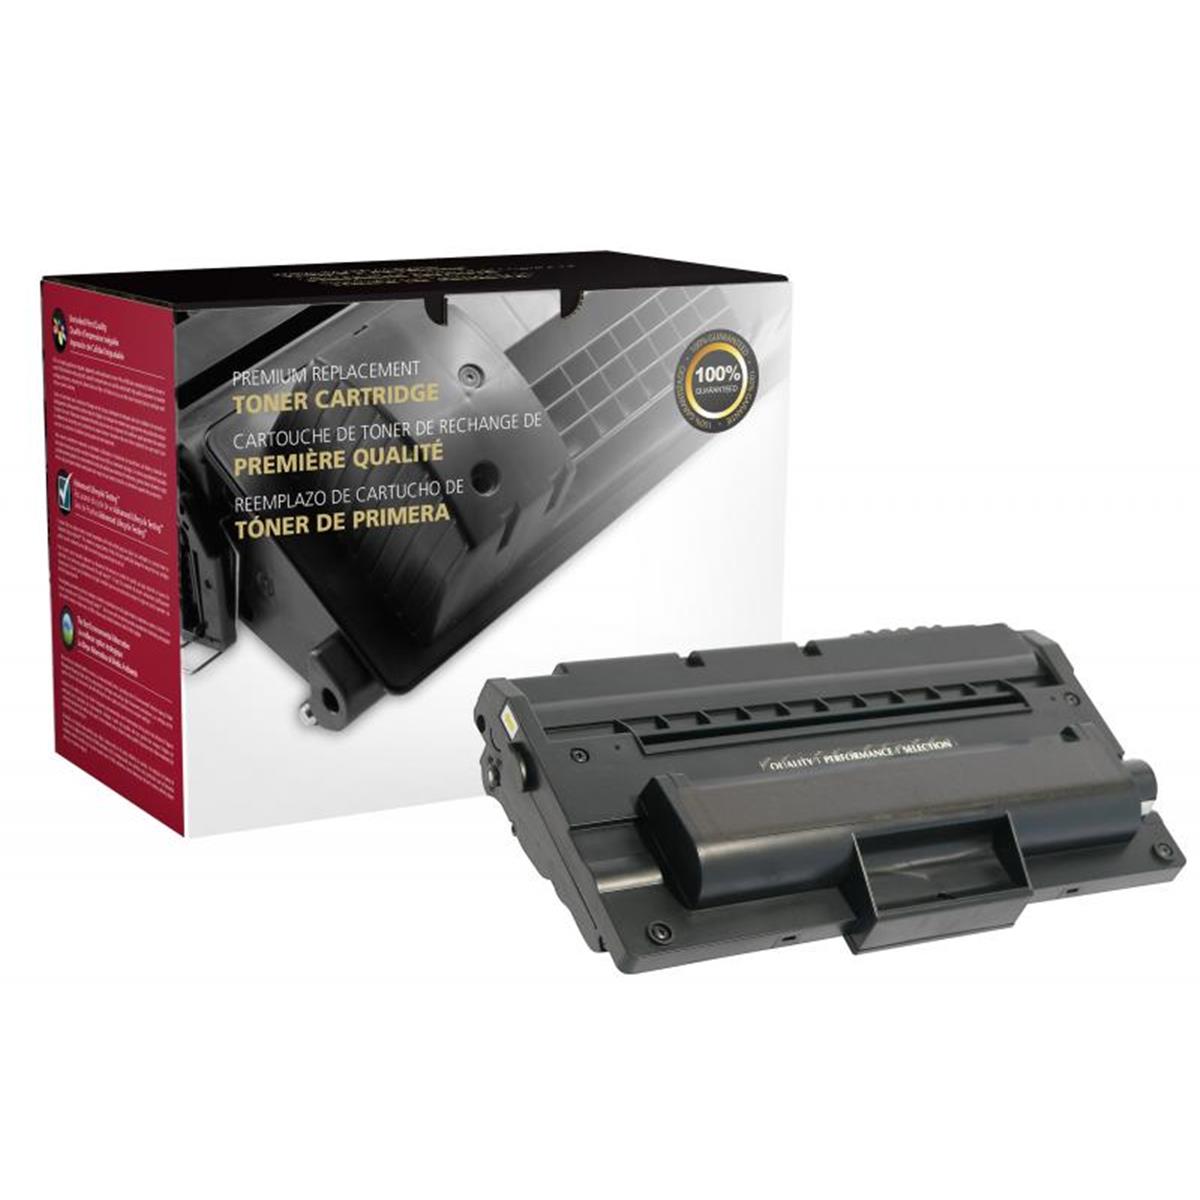 Picture of Dell 114210P High Yield Toner Cartridge for Dell 1600